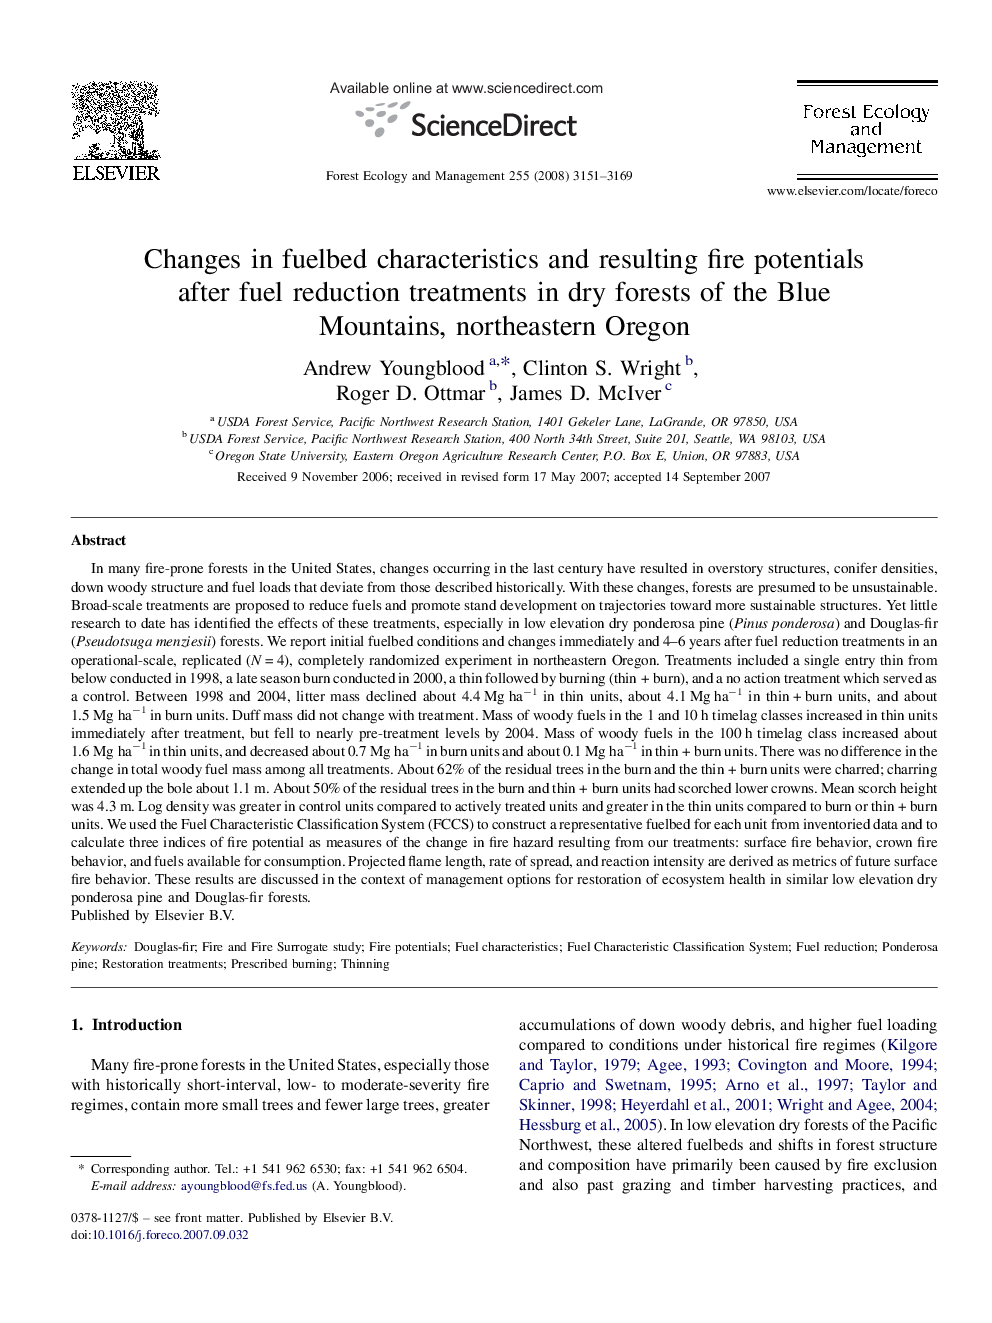 Changes in fuelbed characteristics and resulting fire potentials after fuel reduction treatments in dry forests of the Blue Mountains, northeastern Oregon